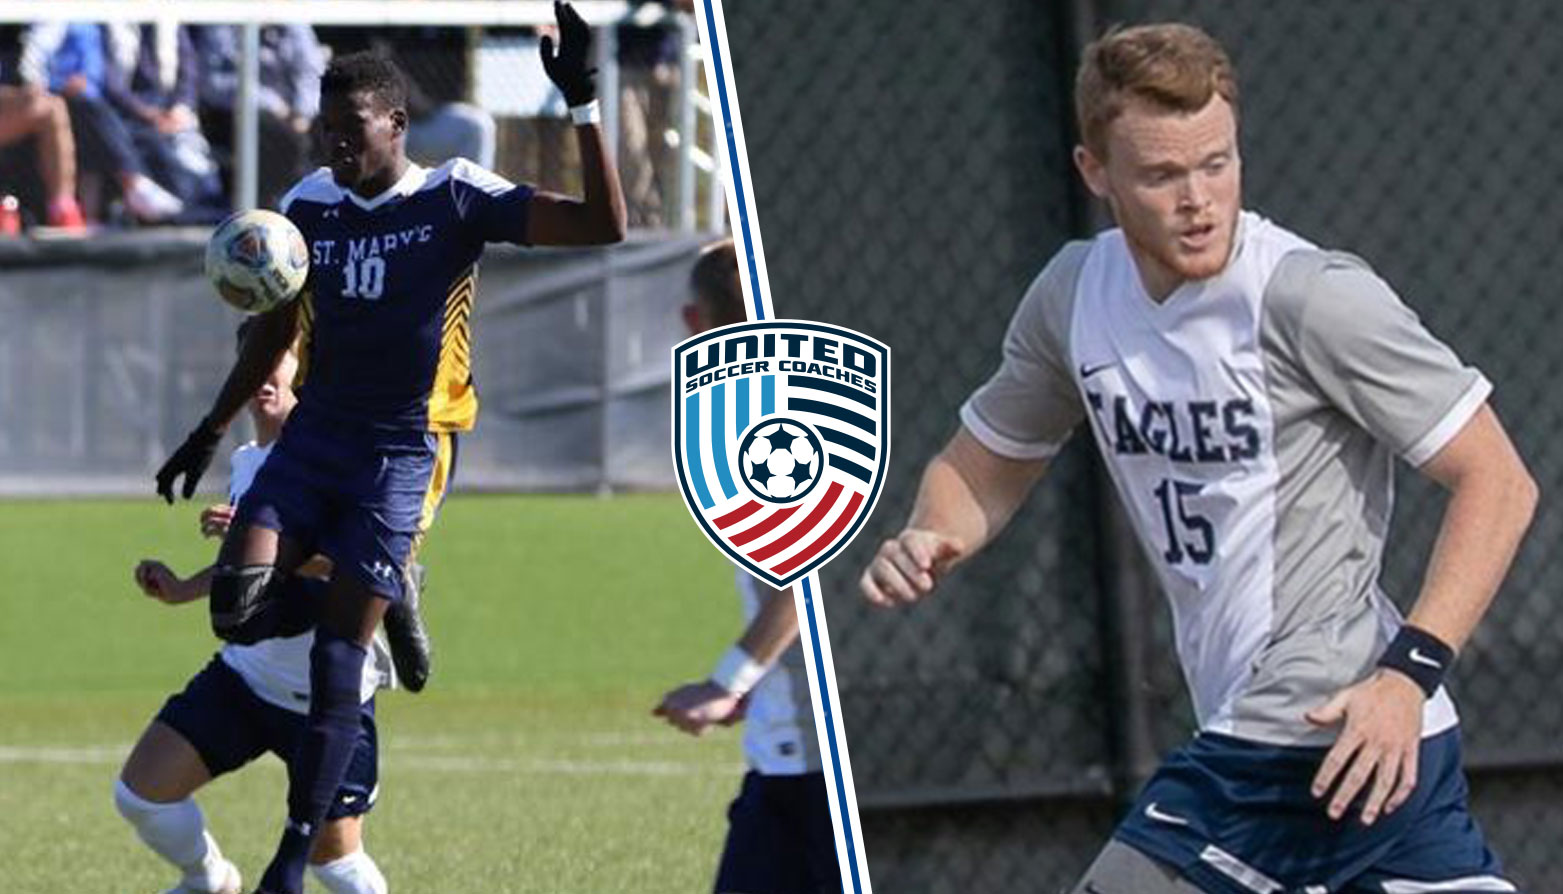 Mary Washington's Carey and St. Mary's Balogun Collect United Soccer Coaches All-America Honors